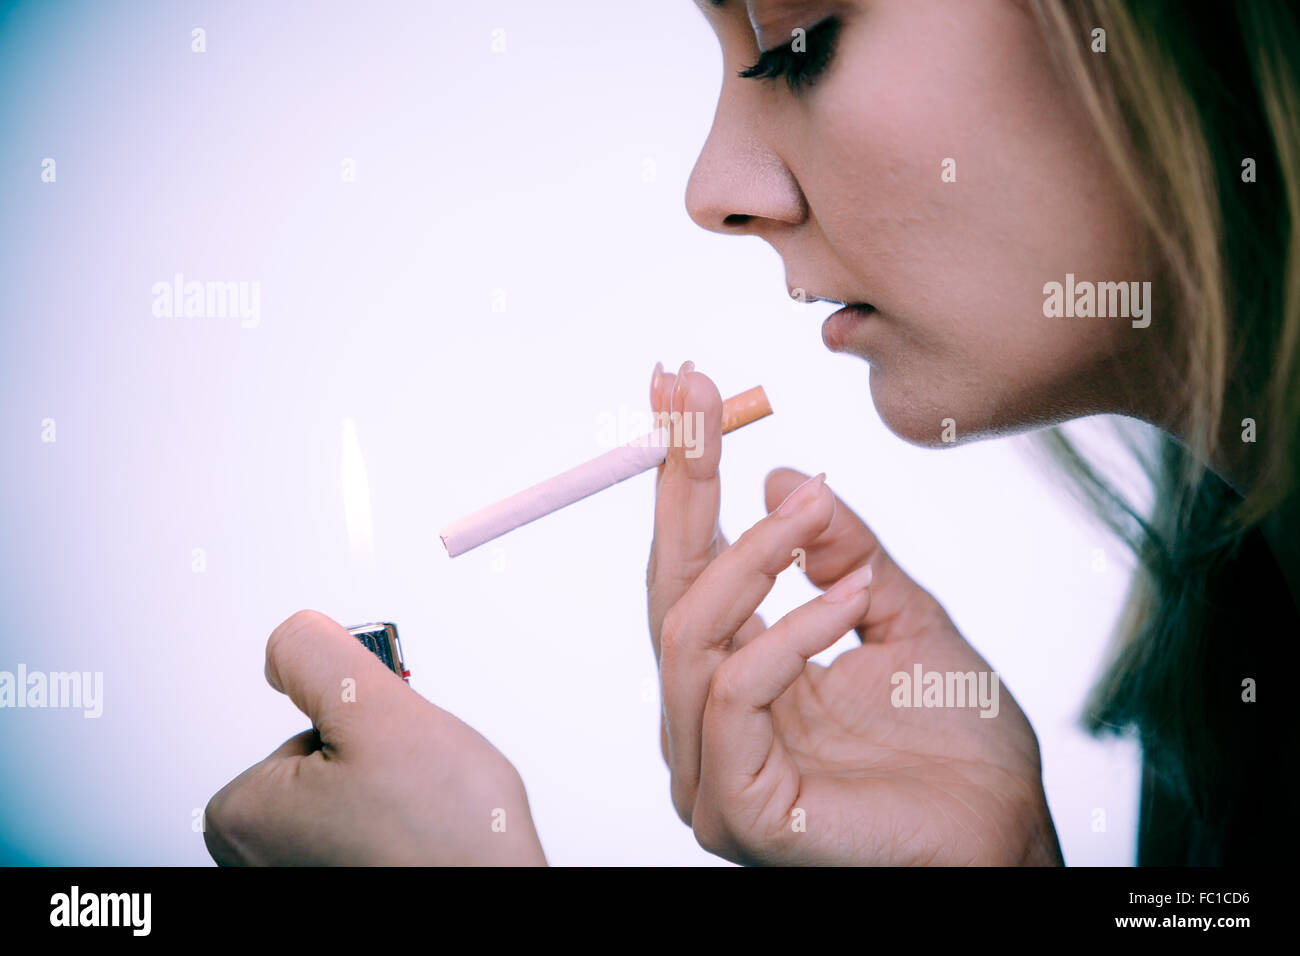 Young woman with lighter lighting up cigarette. Girl smoking. Stock Photo